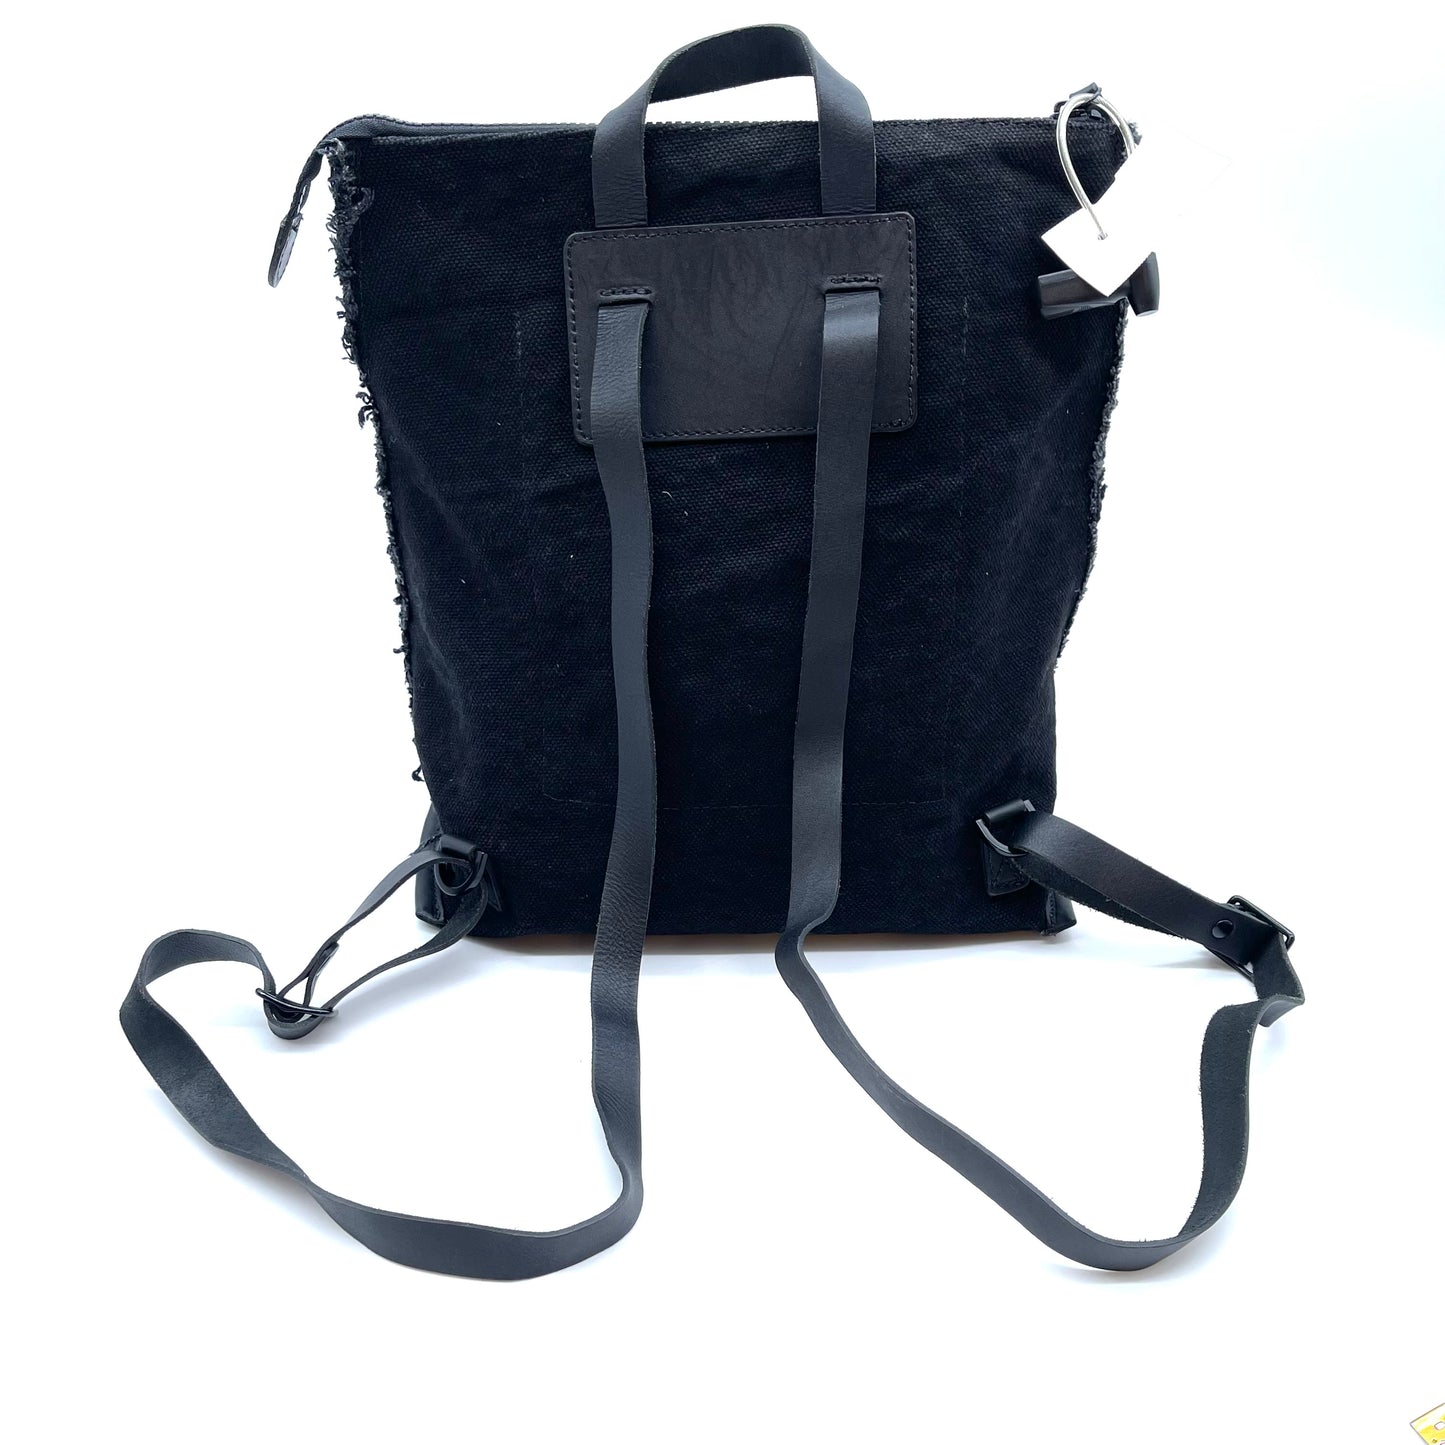 Backpack By Cmc  Size: Small